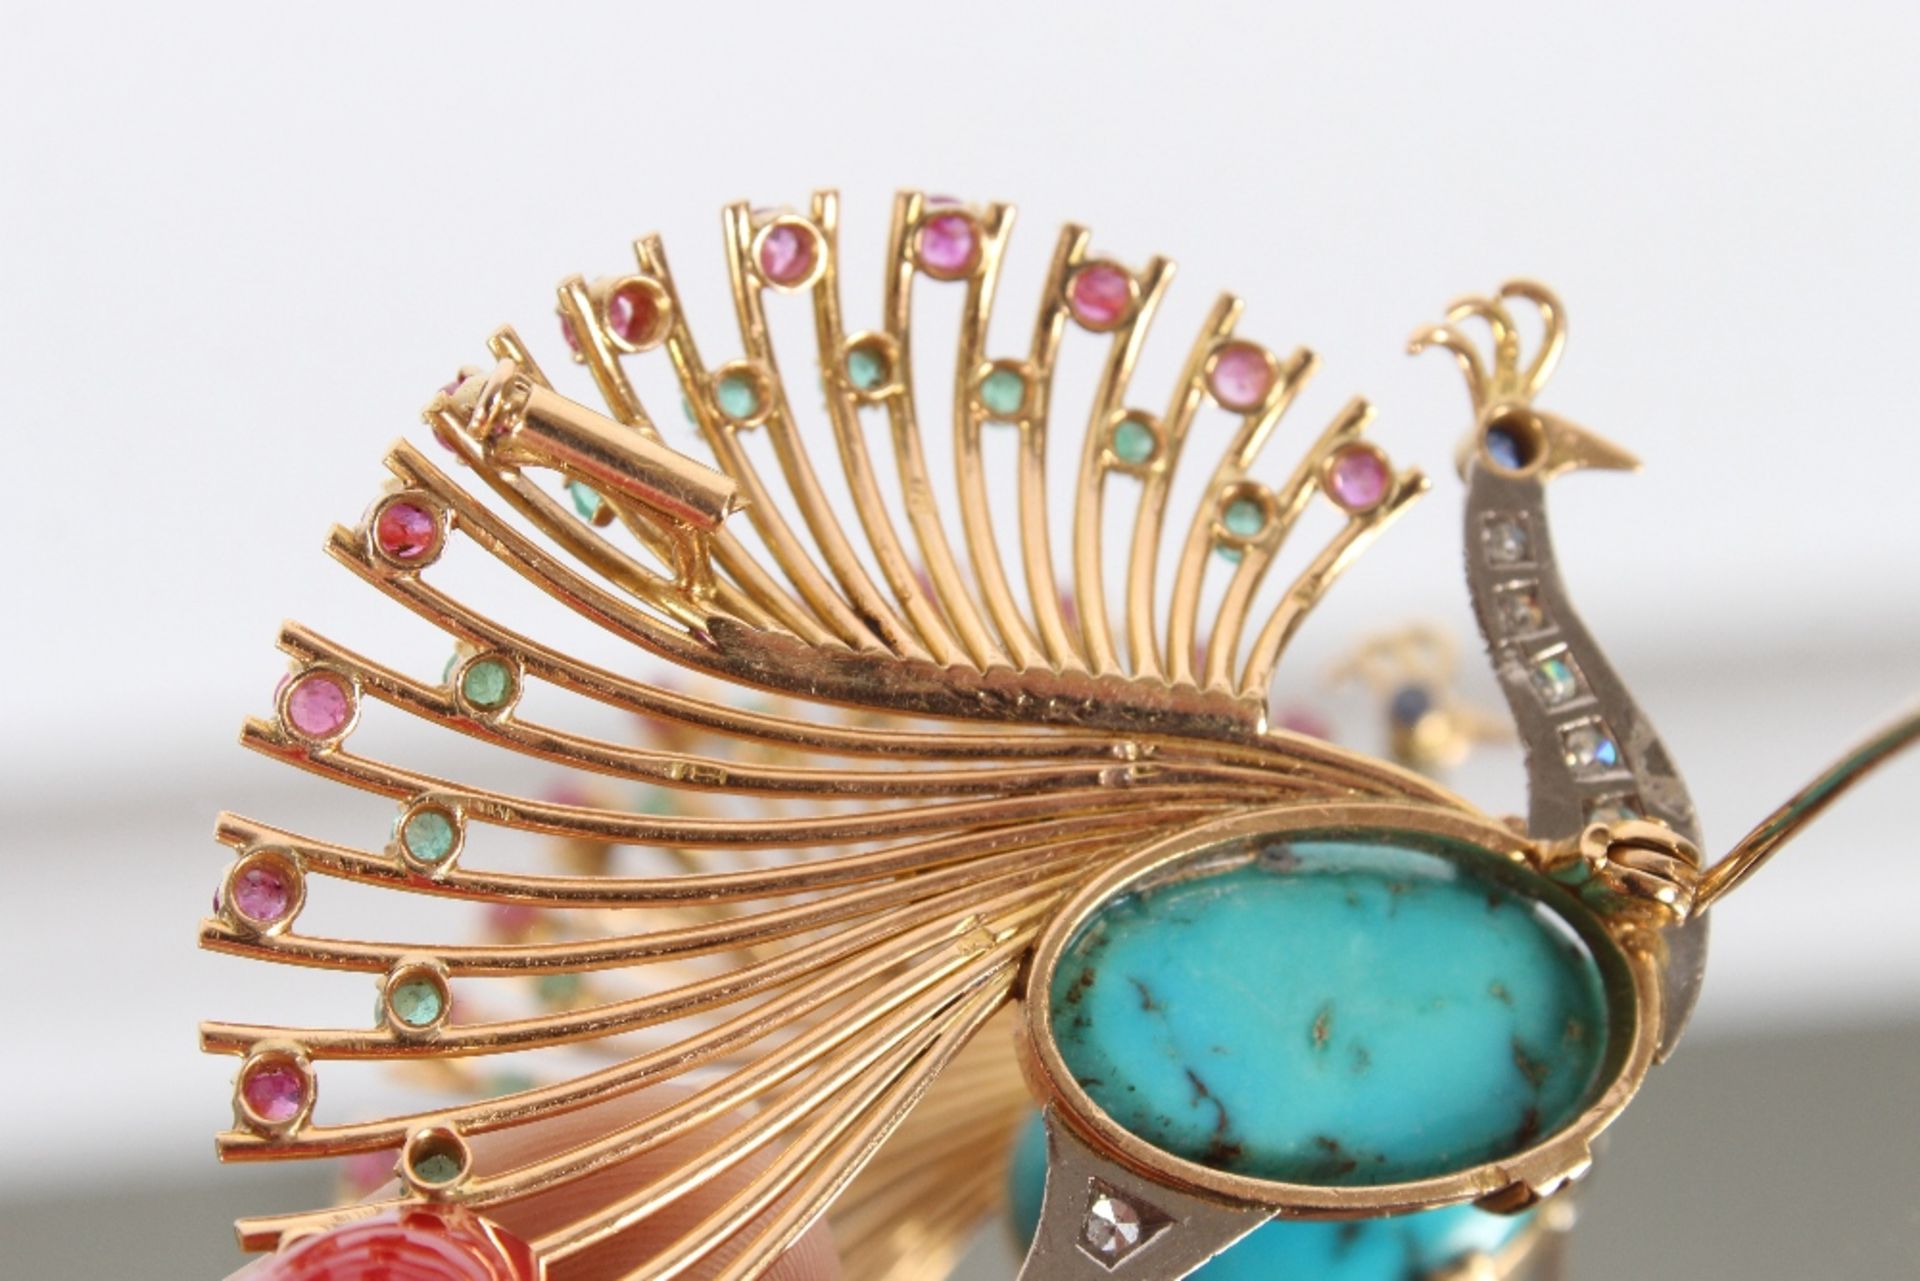 An impressive 18ct gold peacock brooch, set with diamonds, rubies, emeralds and sapphire around a - Image 6 of 6